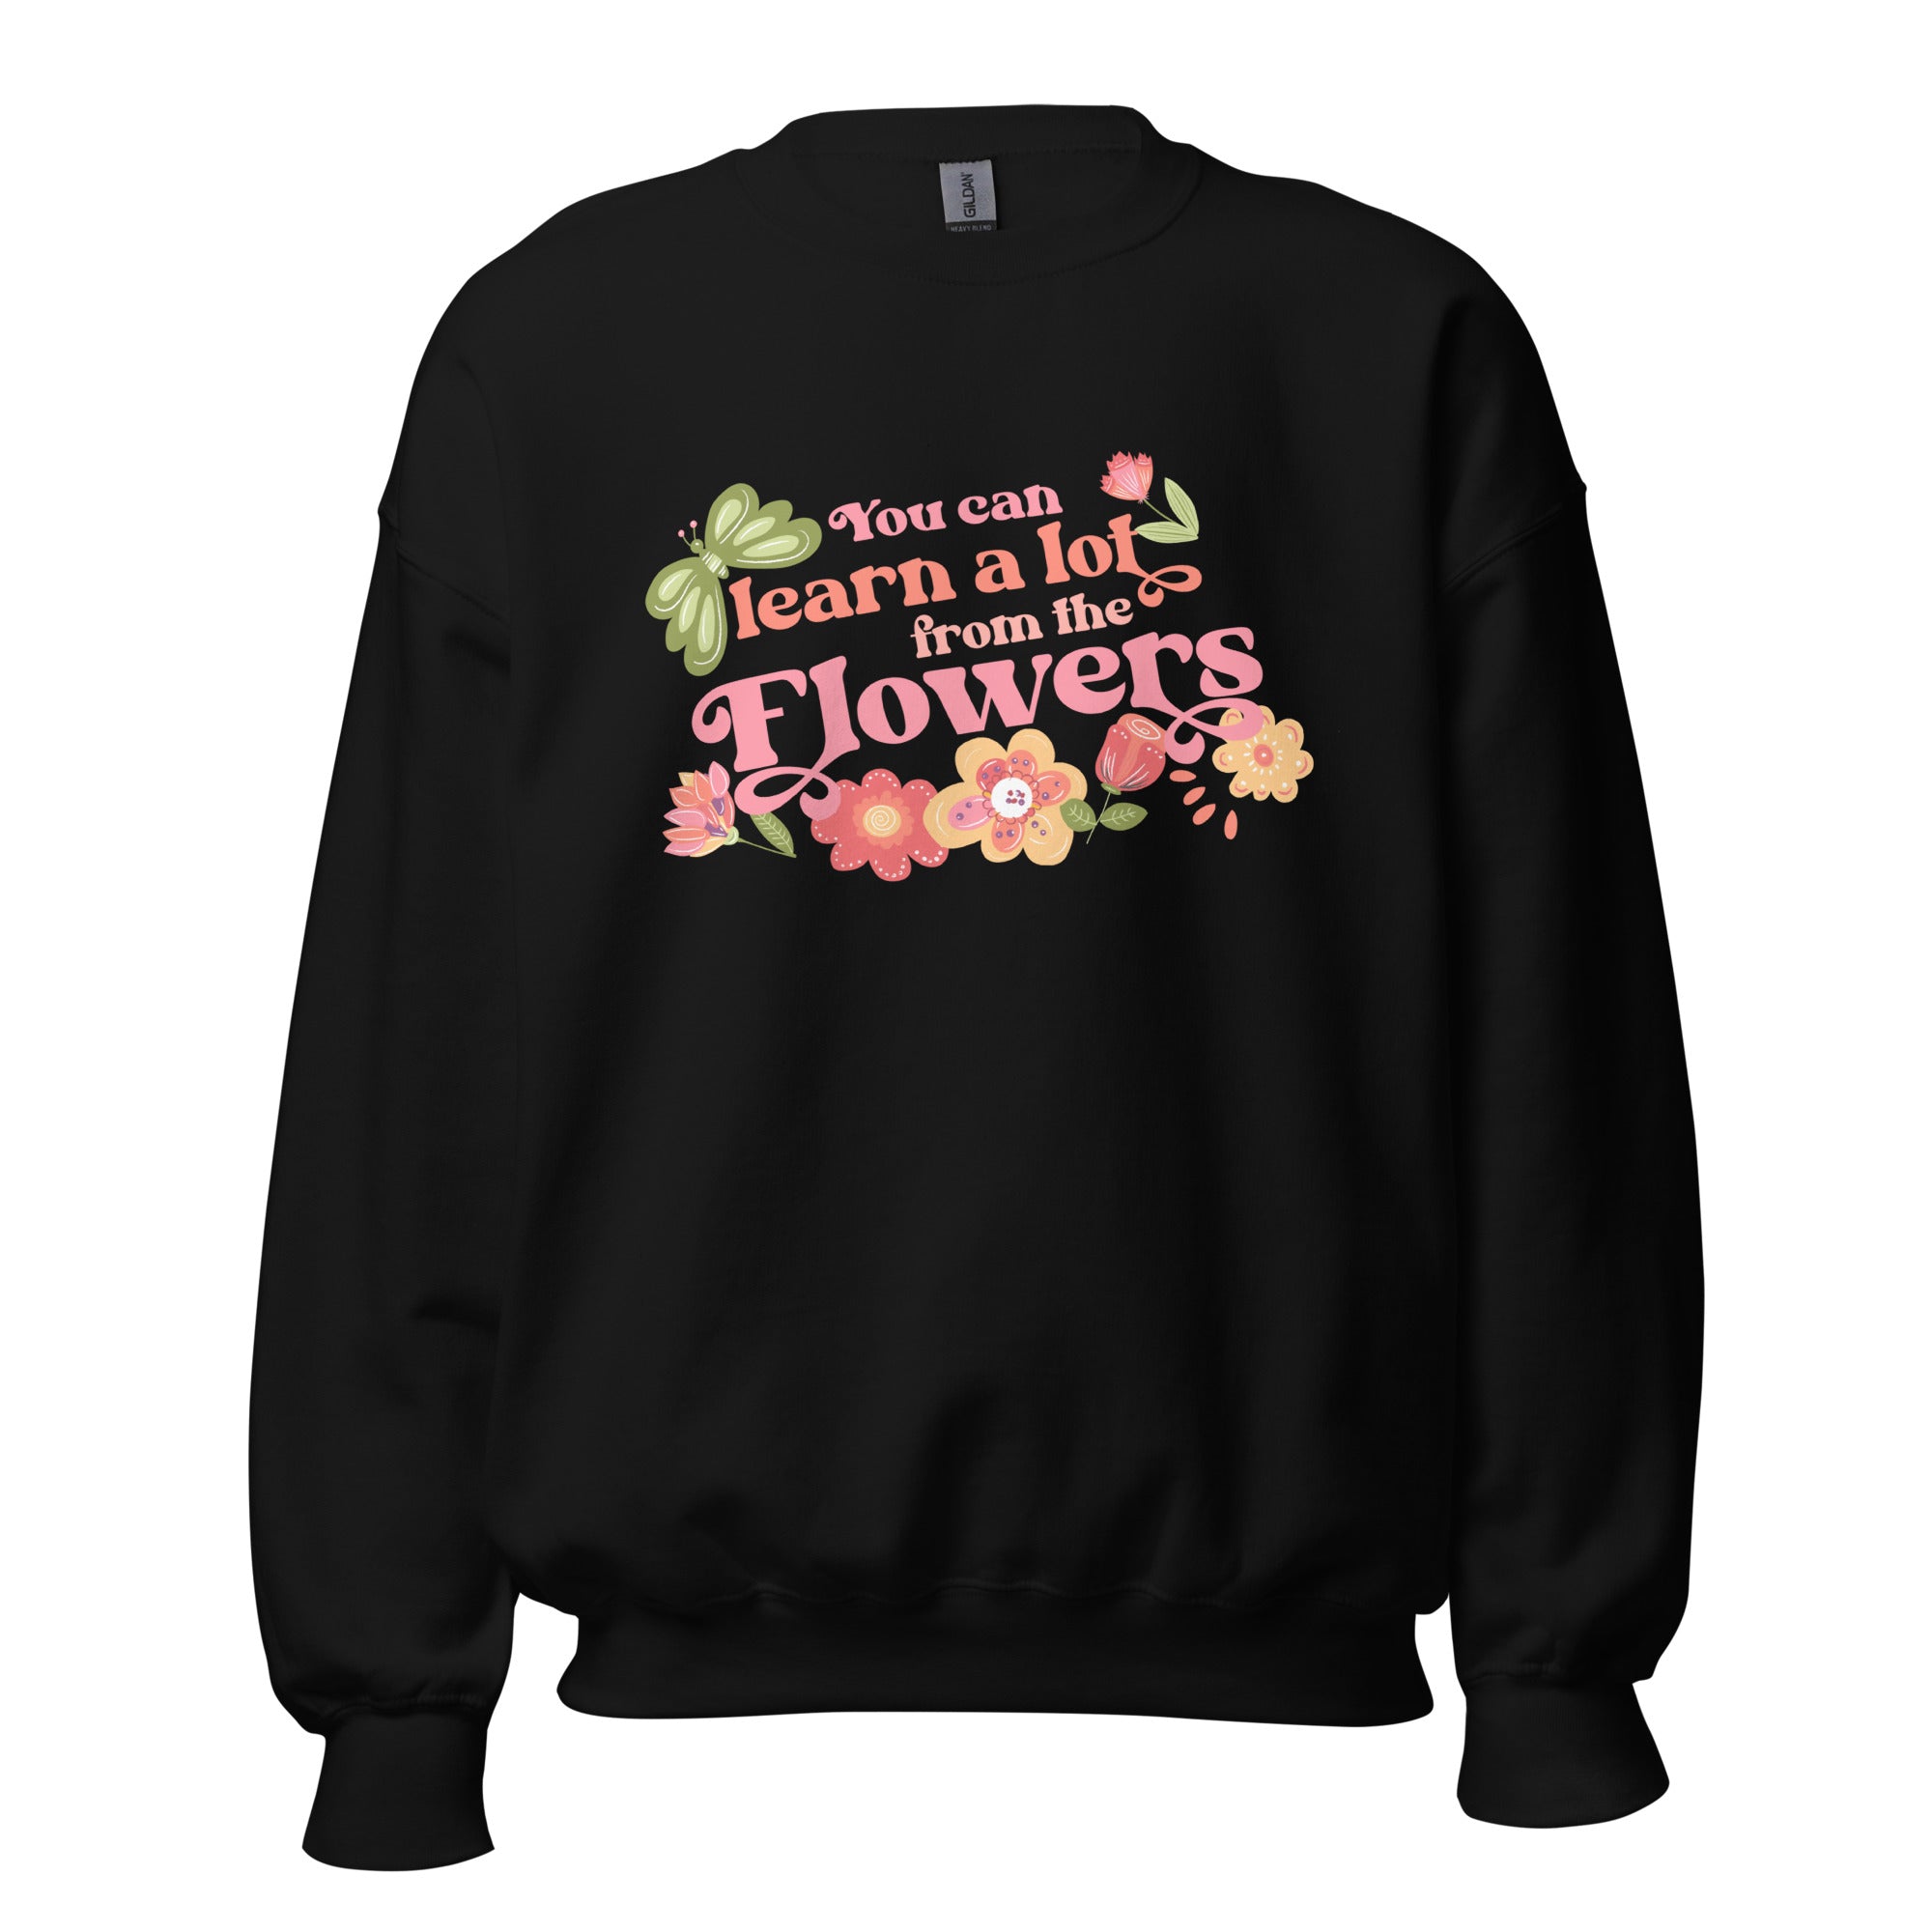 Disney Flower and Garden Sweater You can learn a lot from the Flowers Unisex Sweatshirt